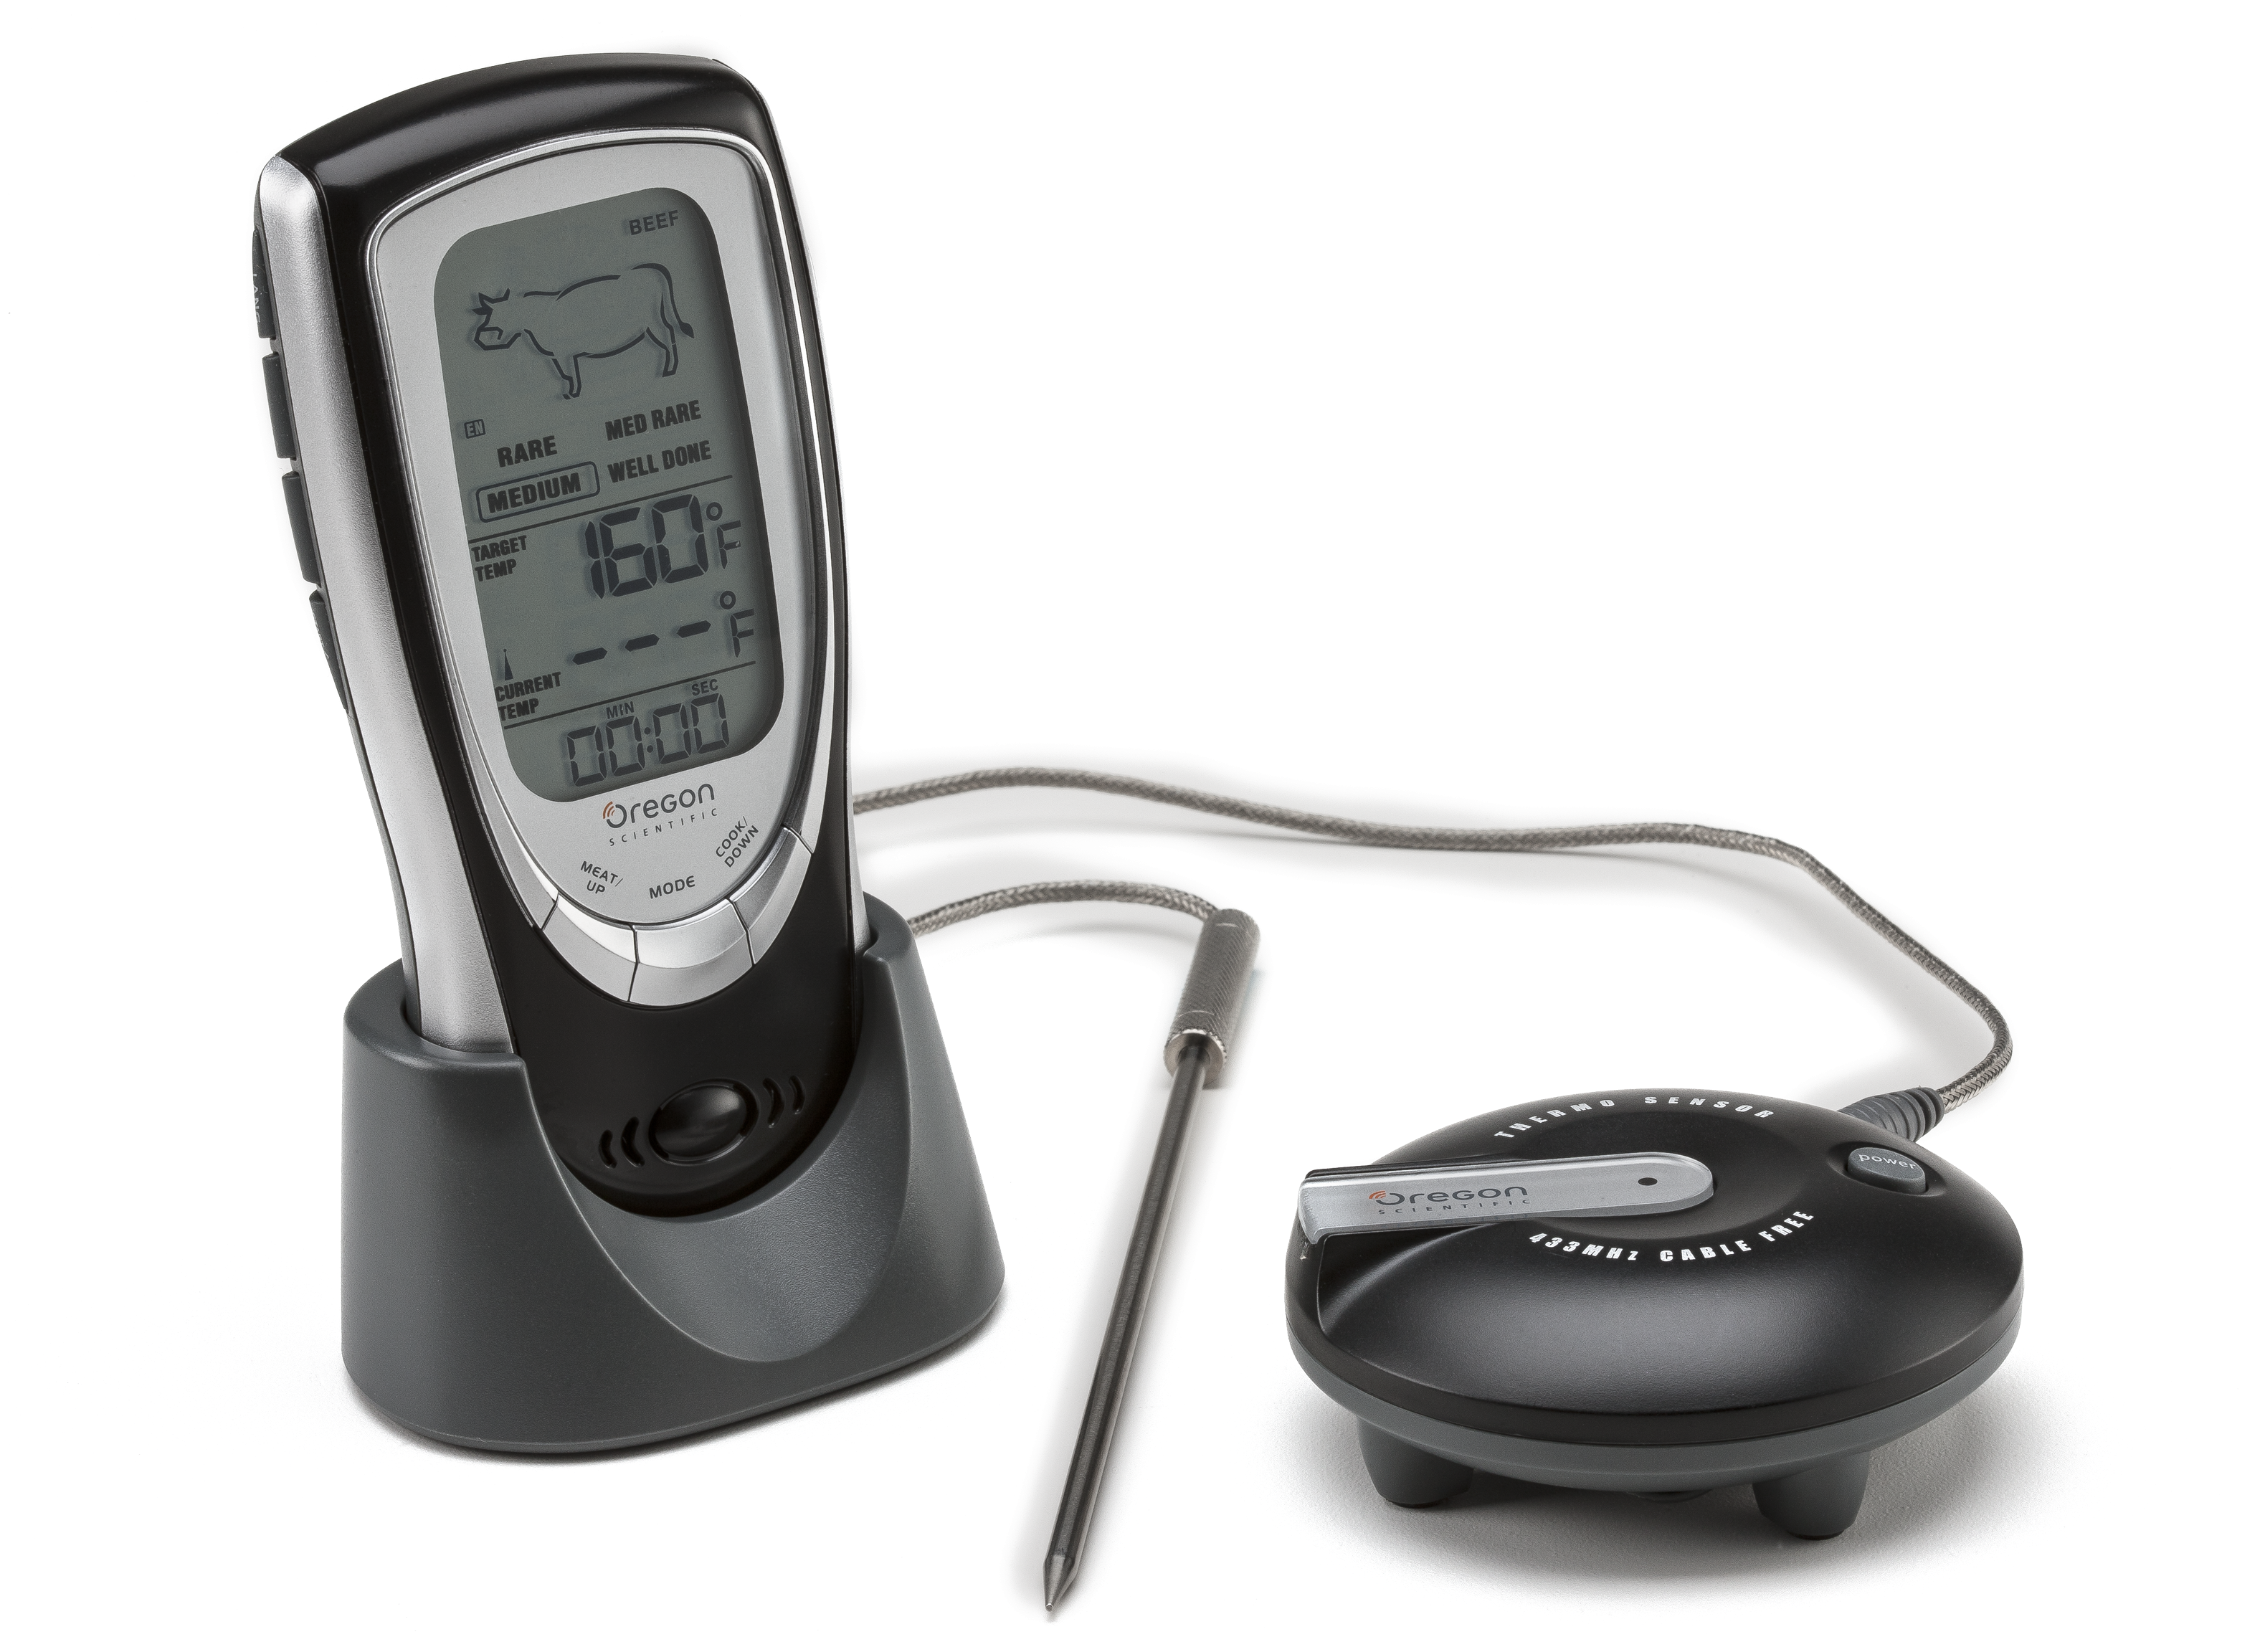 https://crdms.images.consumerreports.org/prod/products/cr/models/231074-meatthermometers-oregonscientific-wirelessbbqovenaw131.png